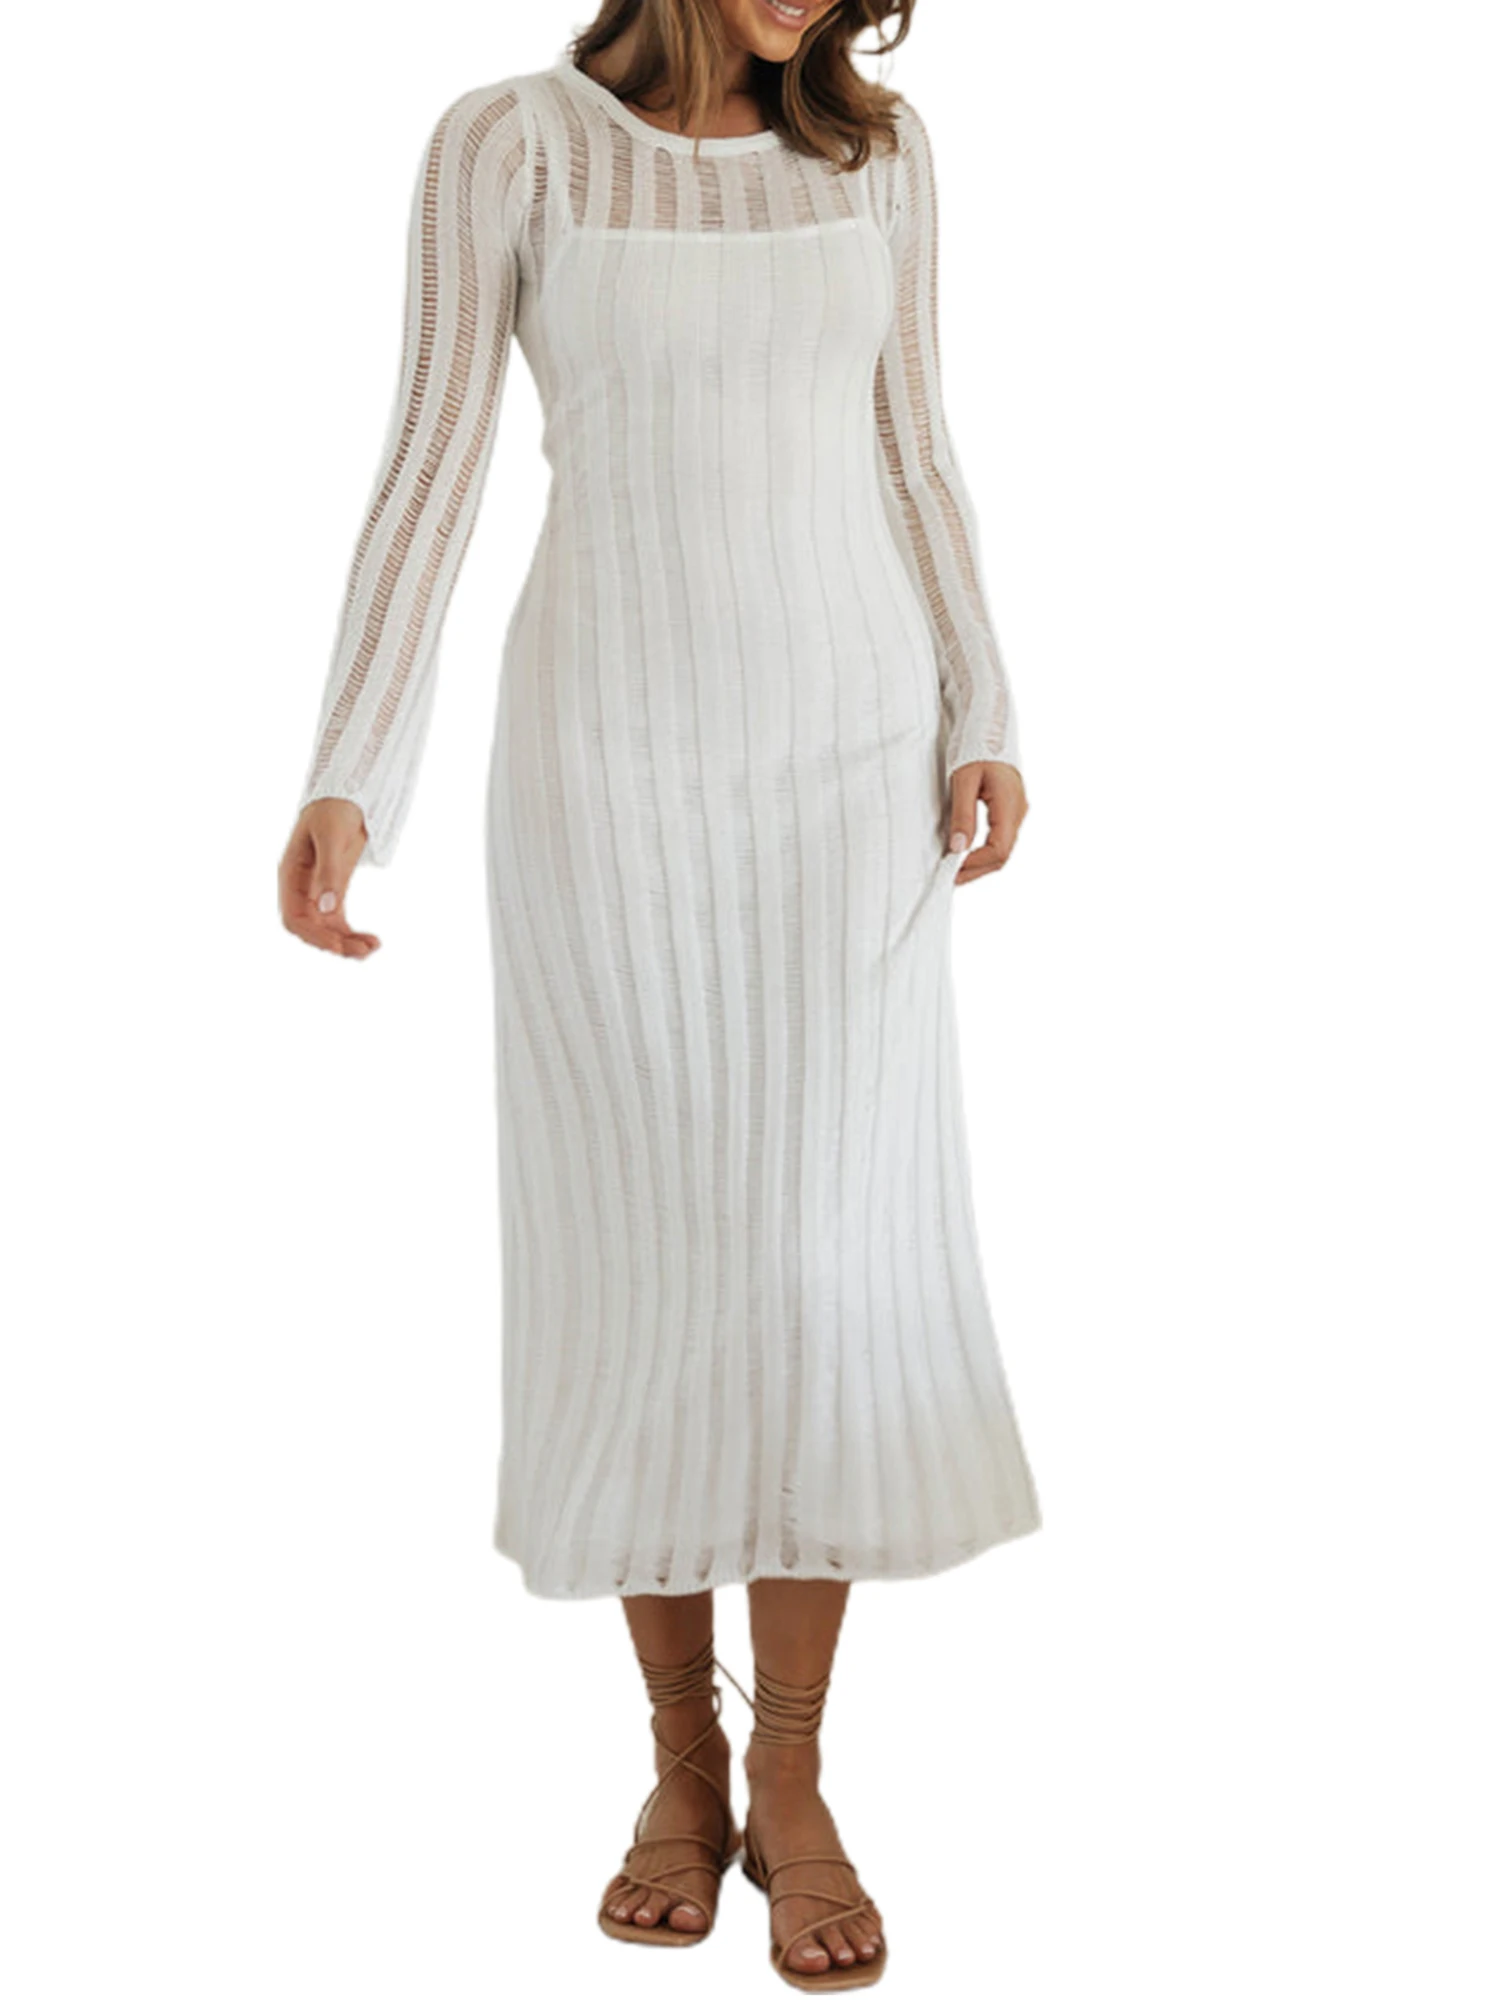 

Elegant and Chic Y2k Style Long Sleeve Knit Dress with Hollow Out Design Perfect for Summer Beach Parties and Casual Outings